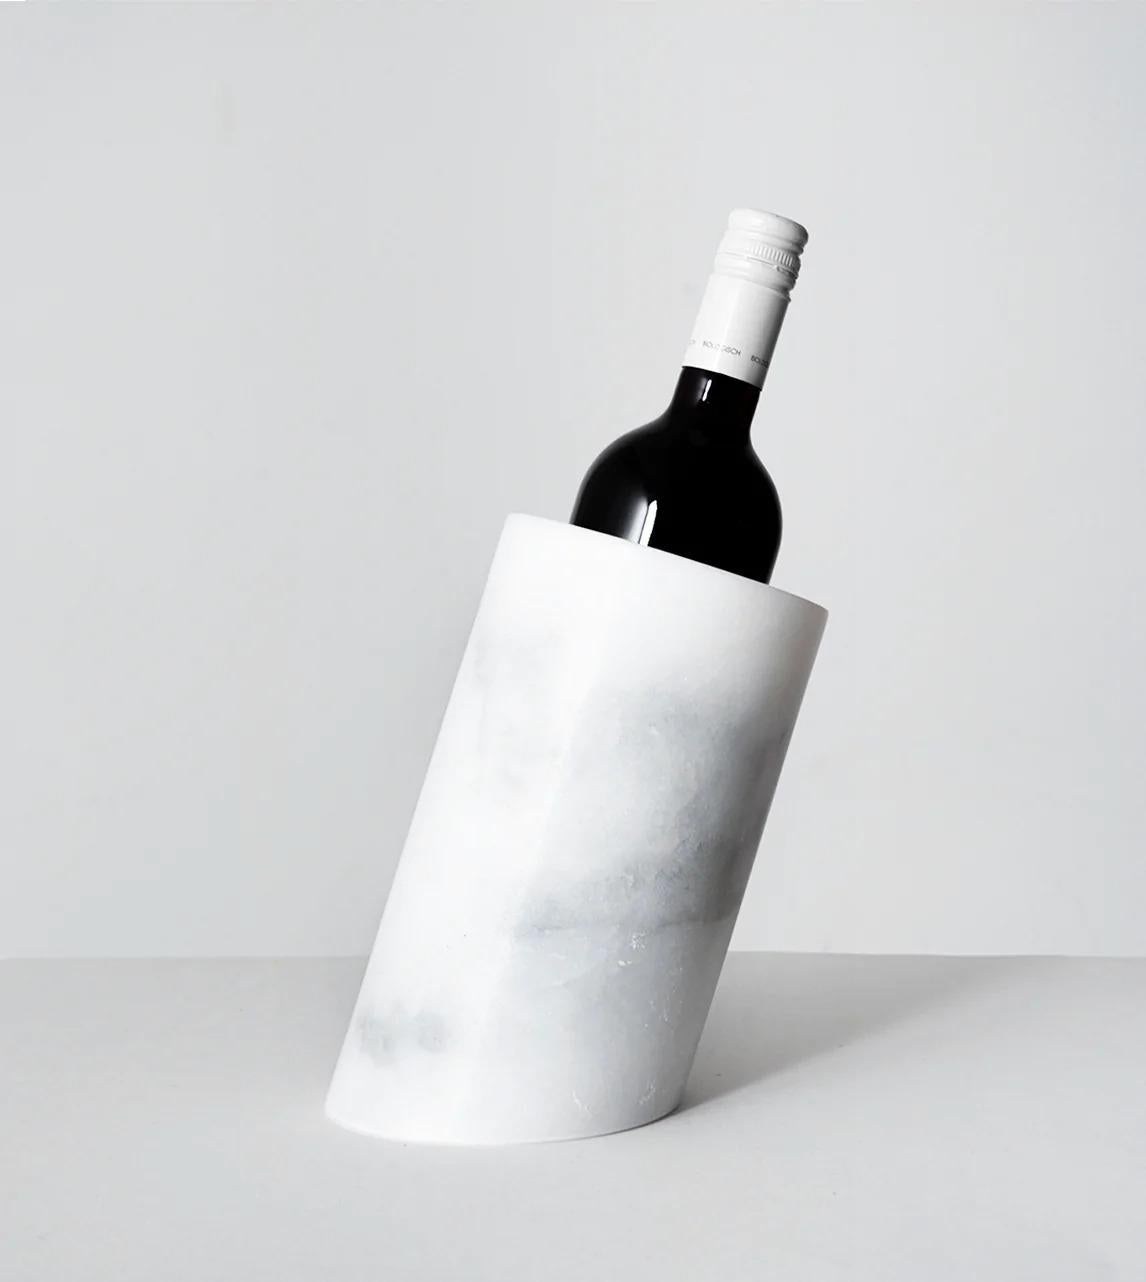 This white marble angled wine cooler is designed by us and hand crafted by the artisans within the fair-trade principles.

The natural properties of marble will keep your wine chilled with no need for ice - you can also place this marble cooler in